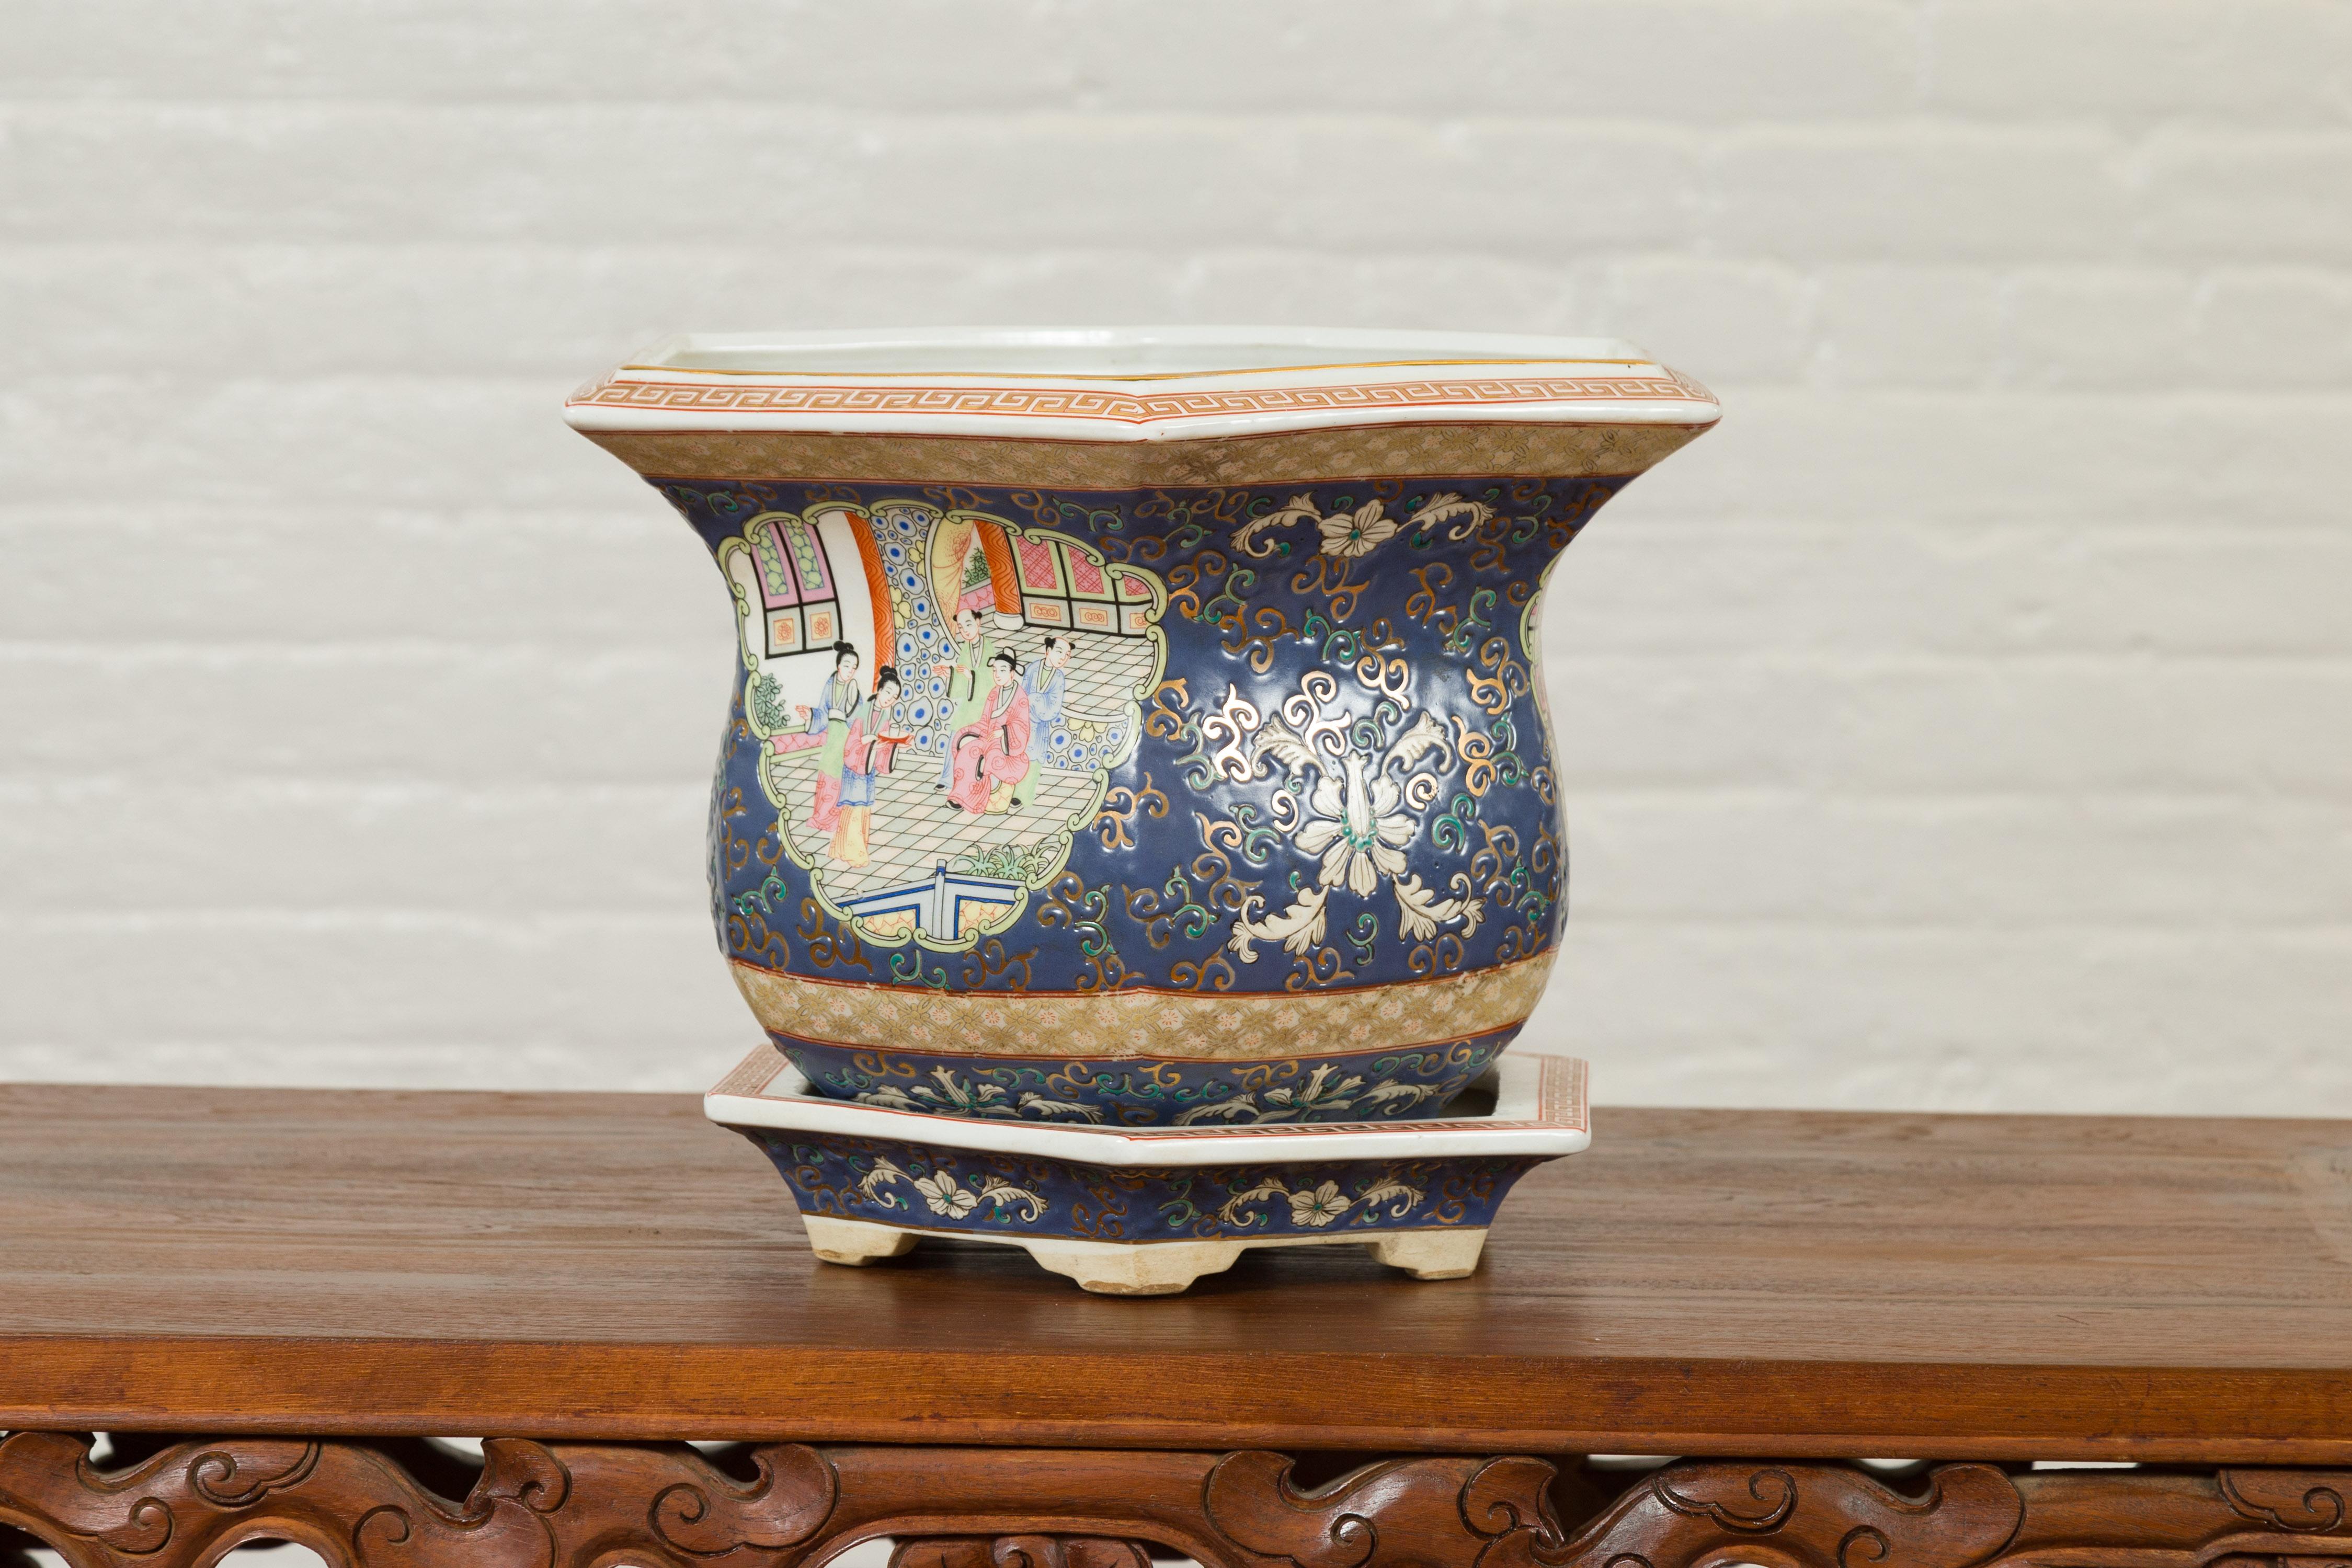 Chinese Hexagonal Planter with Hand Painted Courtyard Scenes Depicting Maidens 3